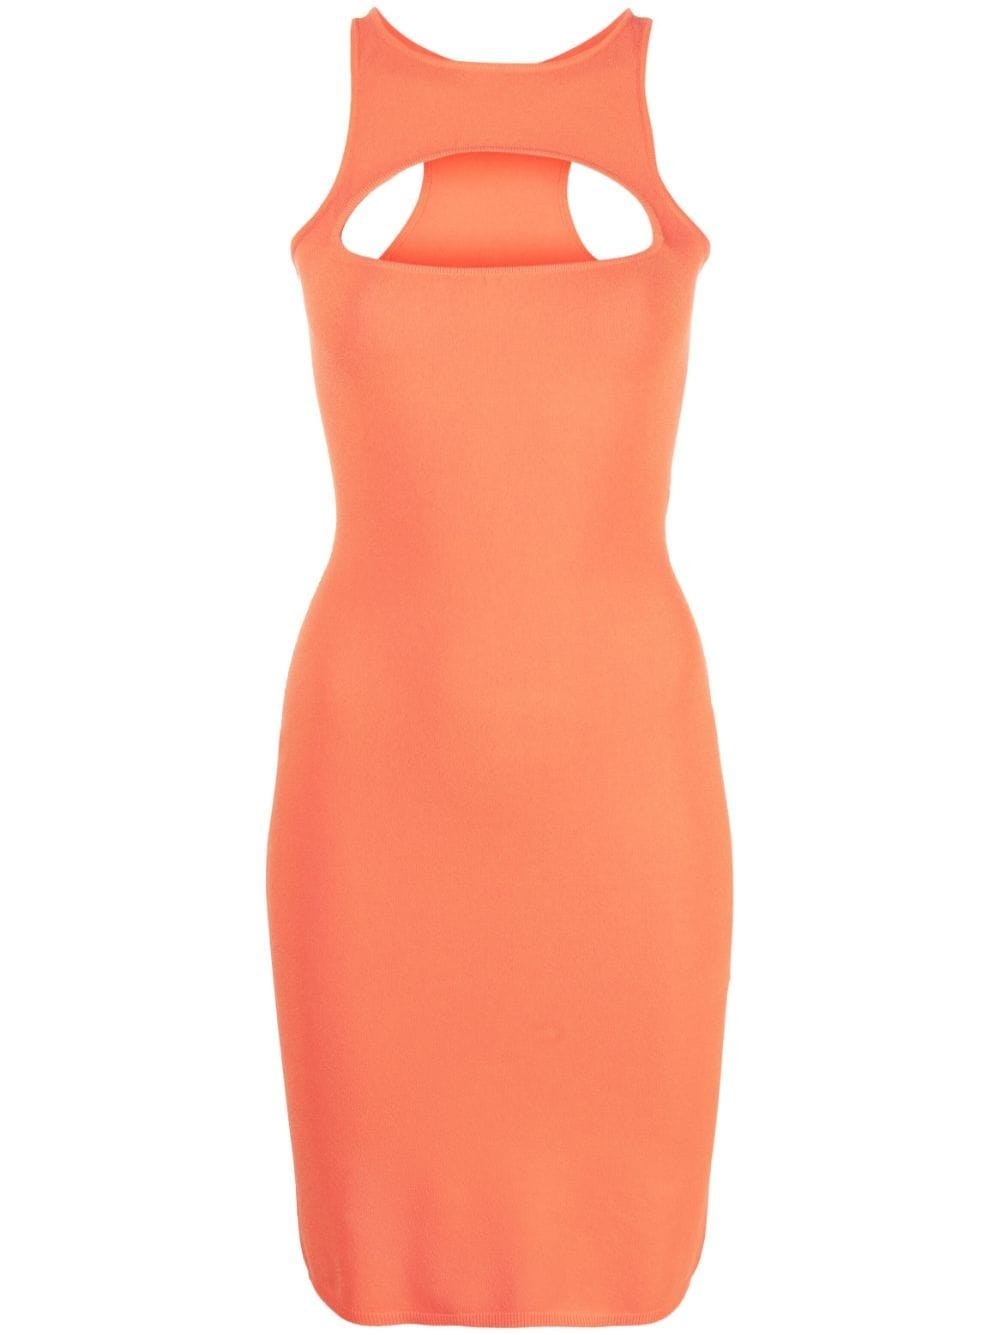 DSQUARED2 SHORT SLEEVELESS ORANGE DRESS WITH CUT-OUT DETAIL